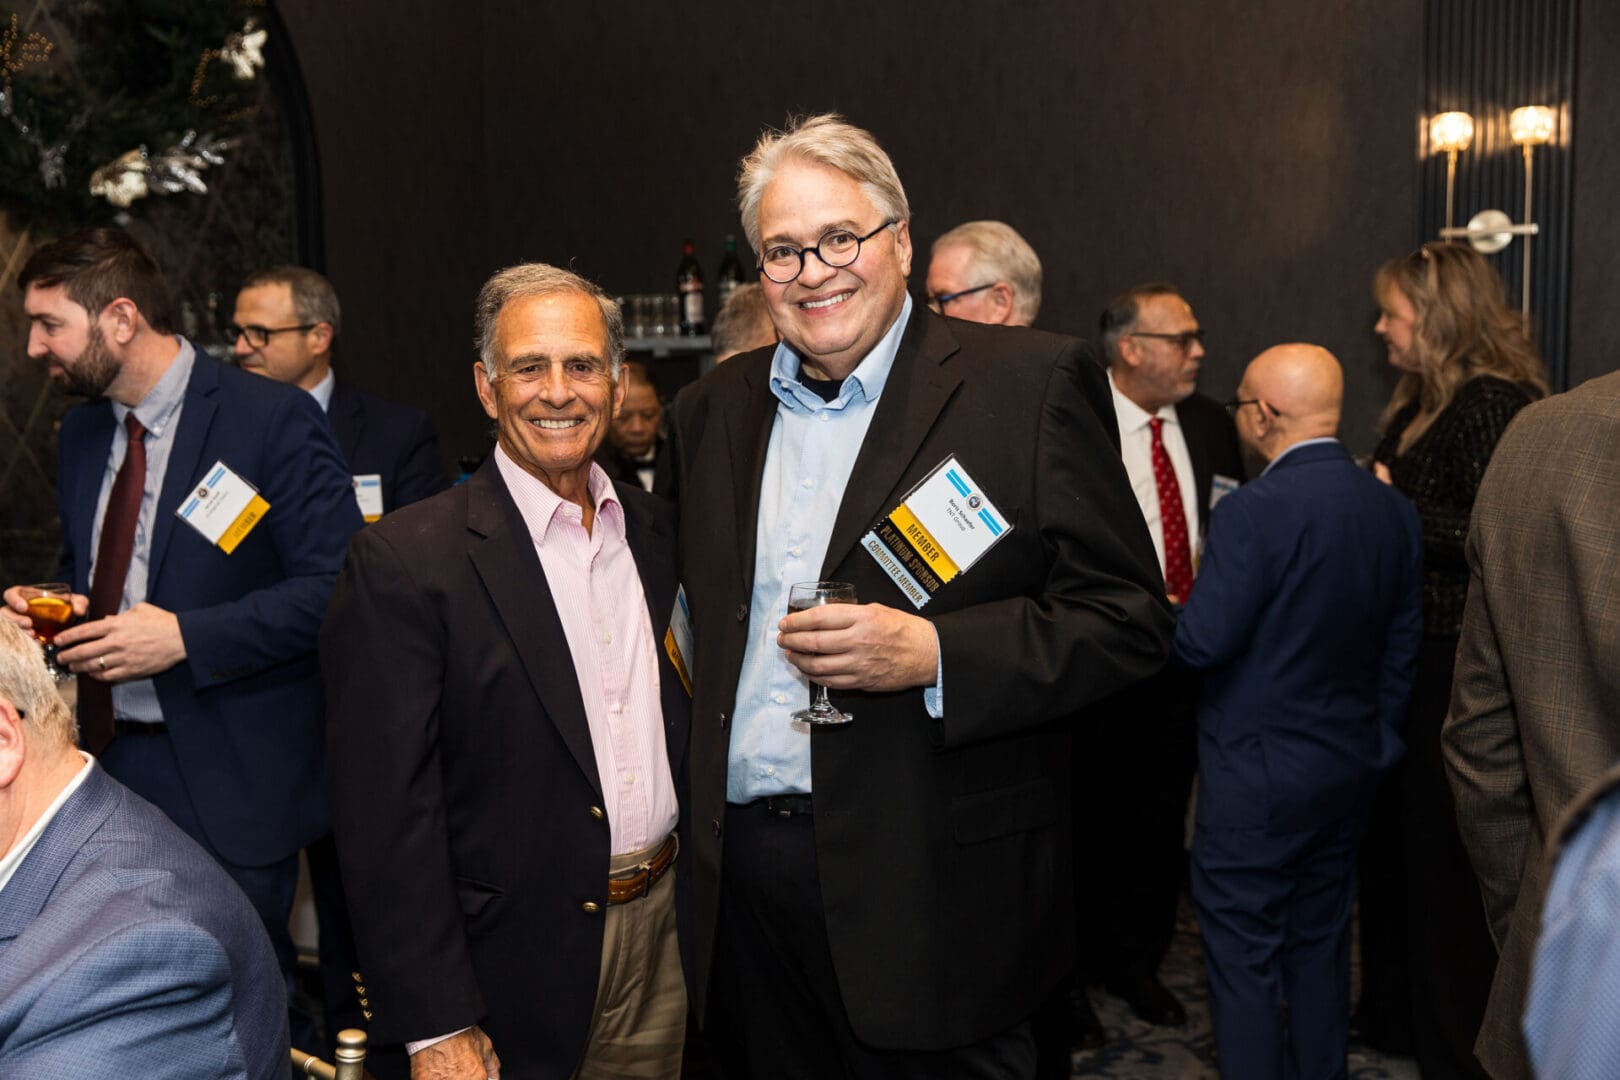 Two men standing next to each other at a business event.